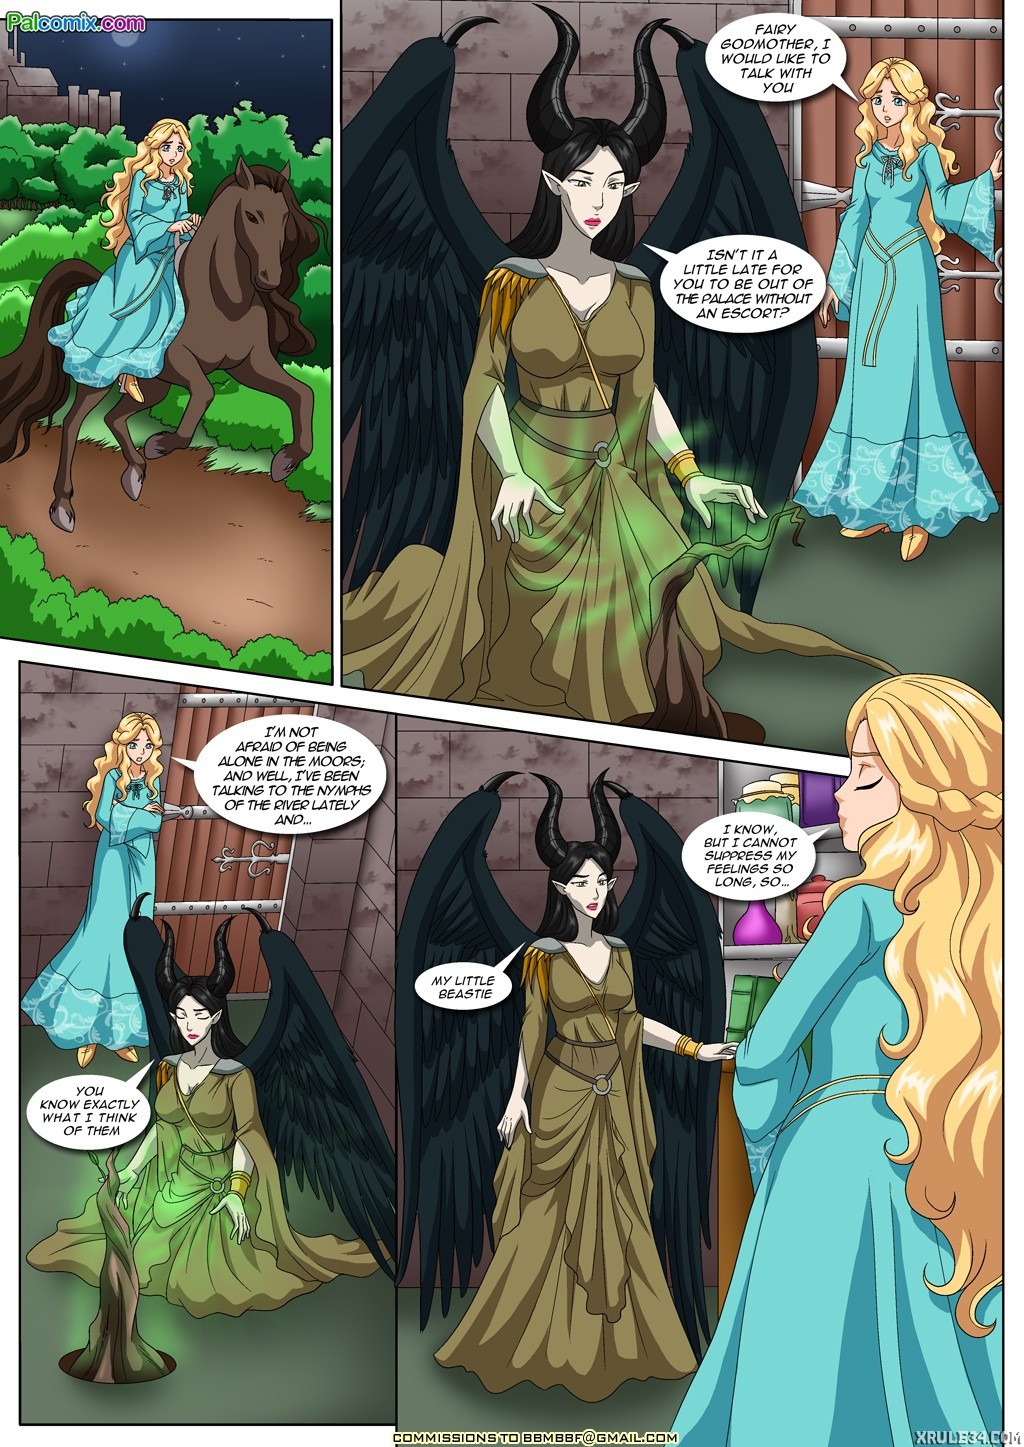 Coming of Age - Sleeping Beauty porn comic picture 6